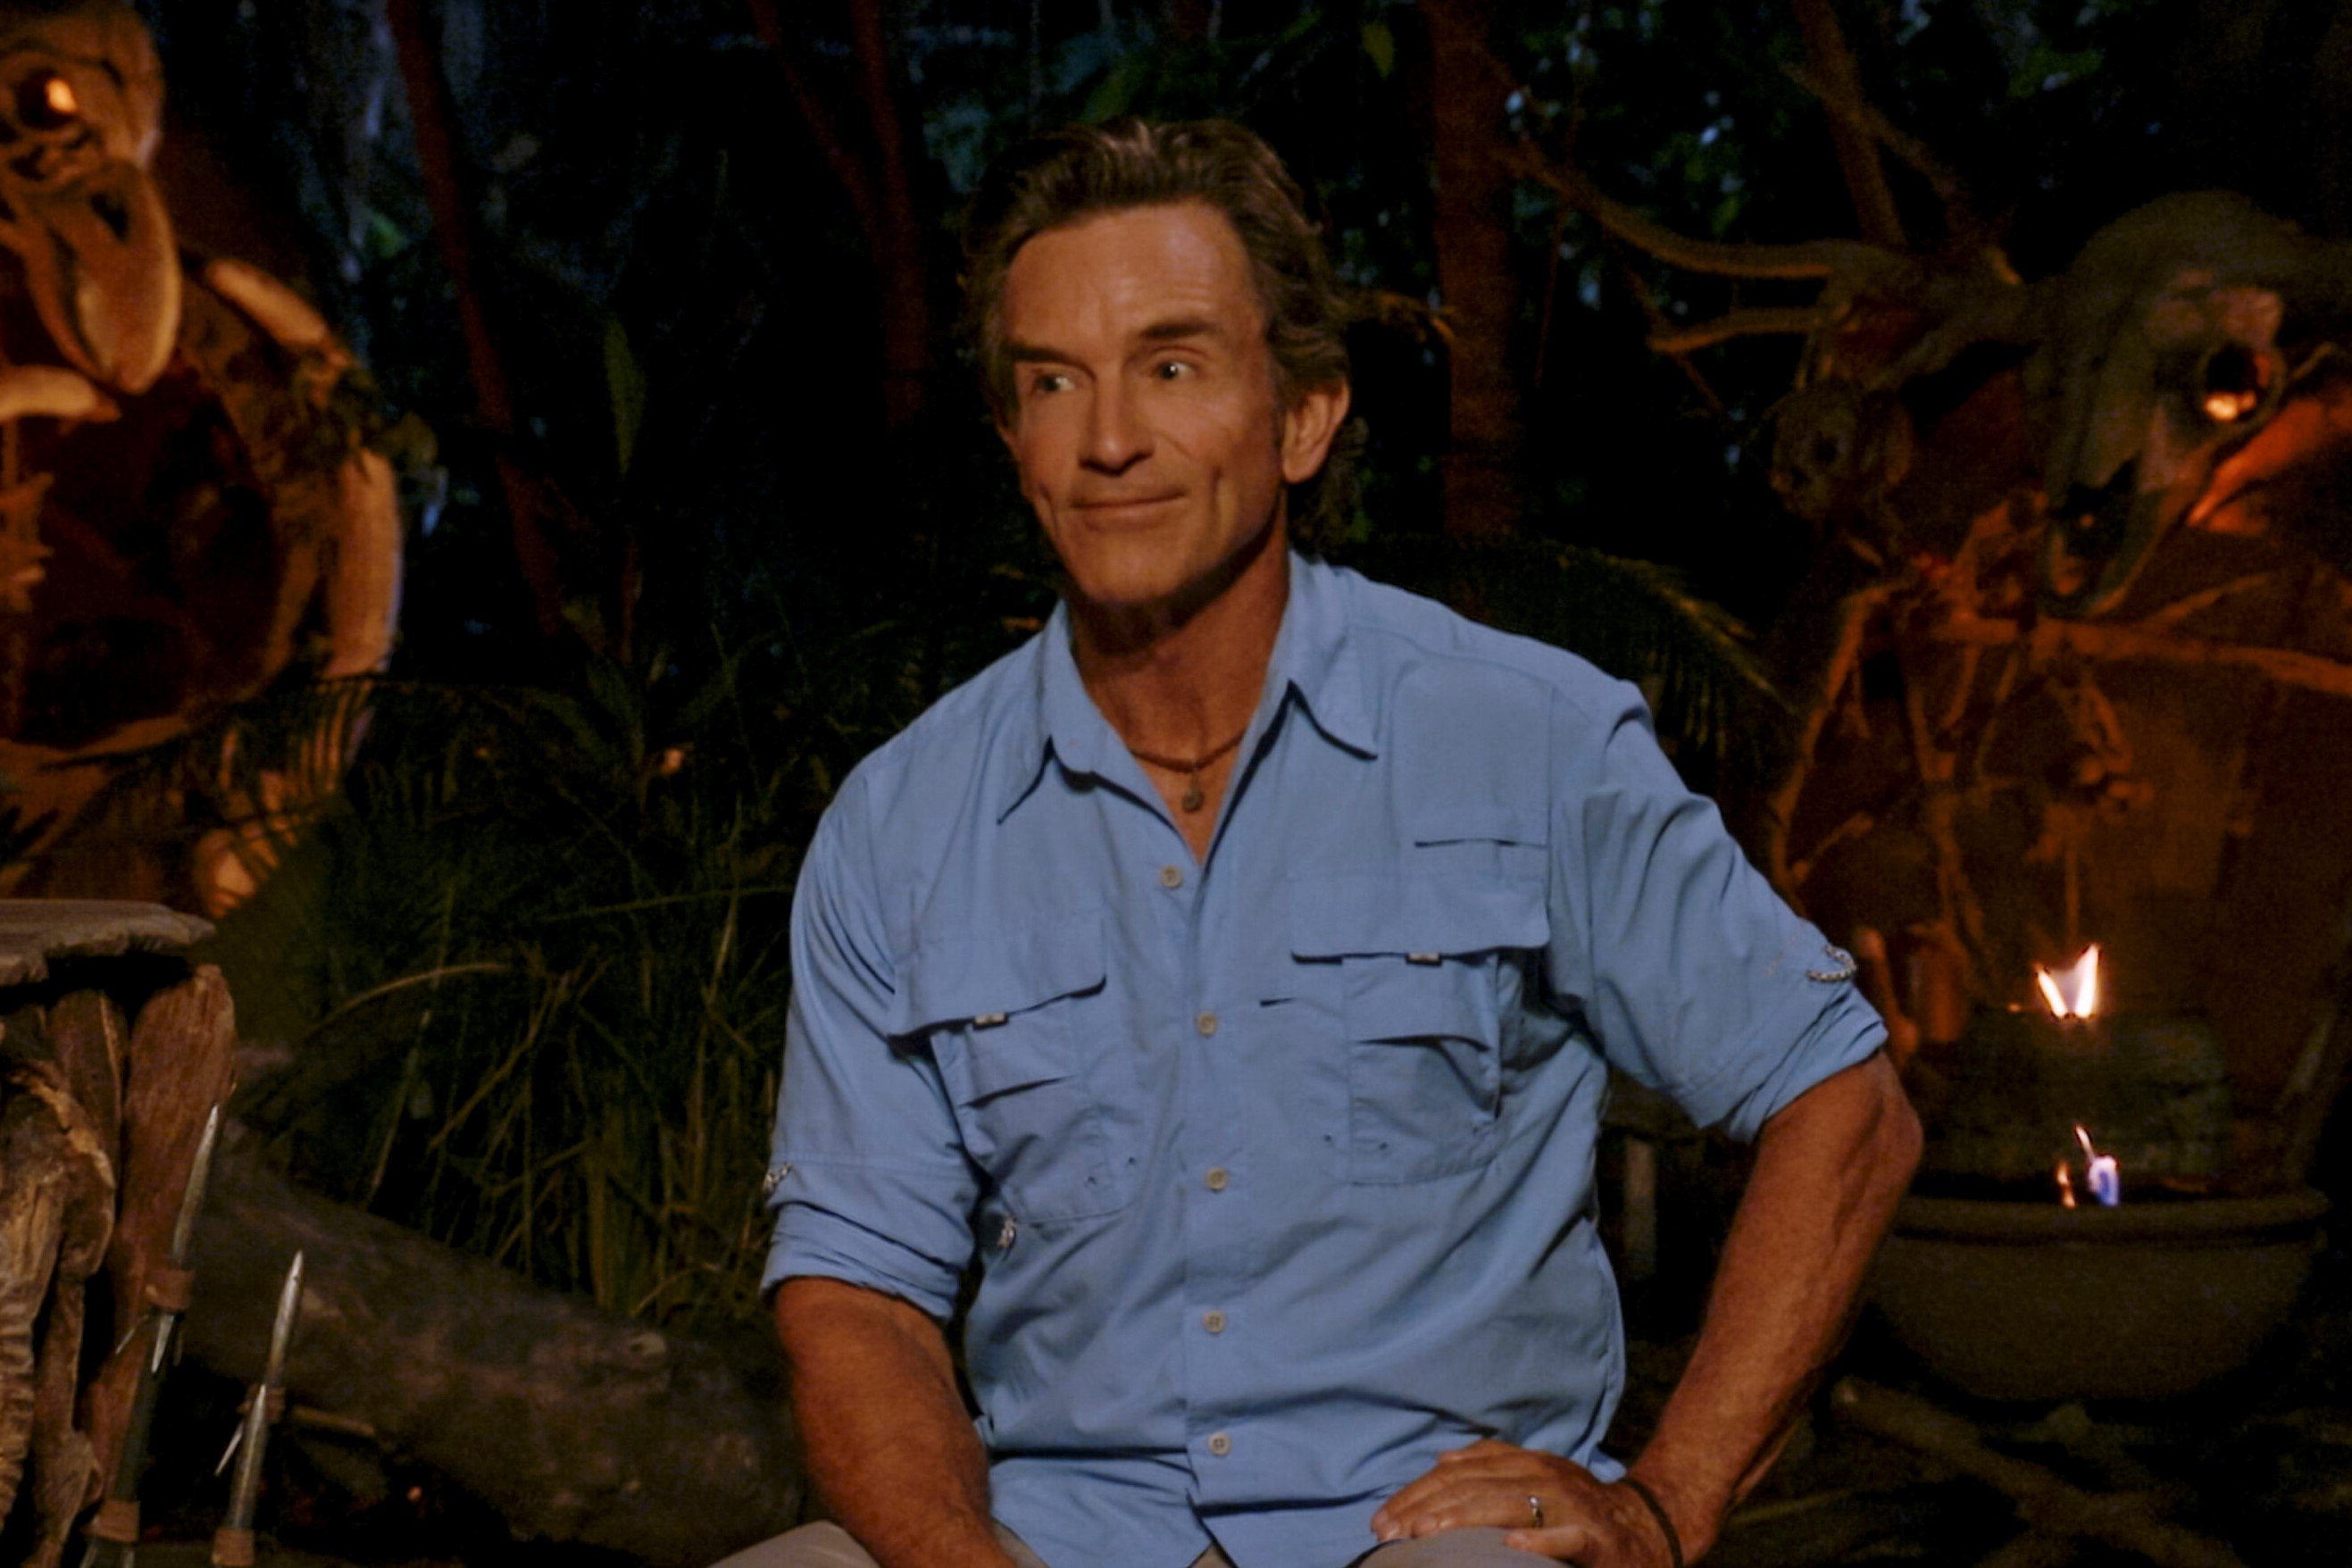 Jeff Probst, who will host 'Survivor' Season 44 on CBS, wears a light blue button-down shirt with rolled-up sleeves. Fans can already find 'Survivor' Season 44 spoilers on the internet.